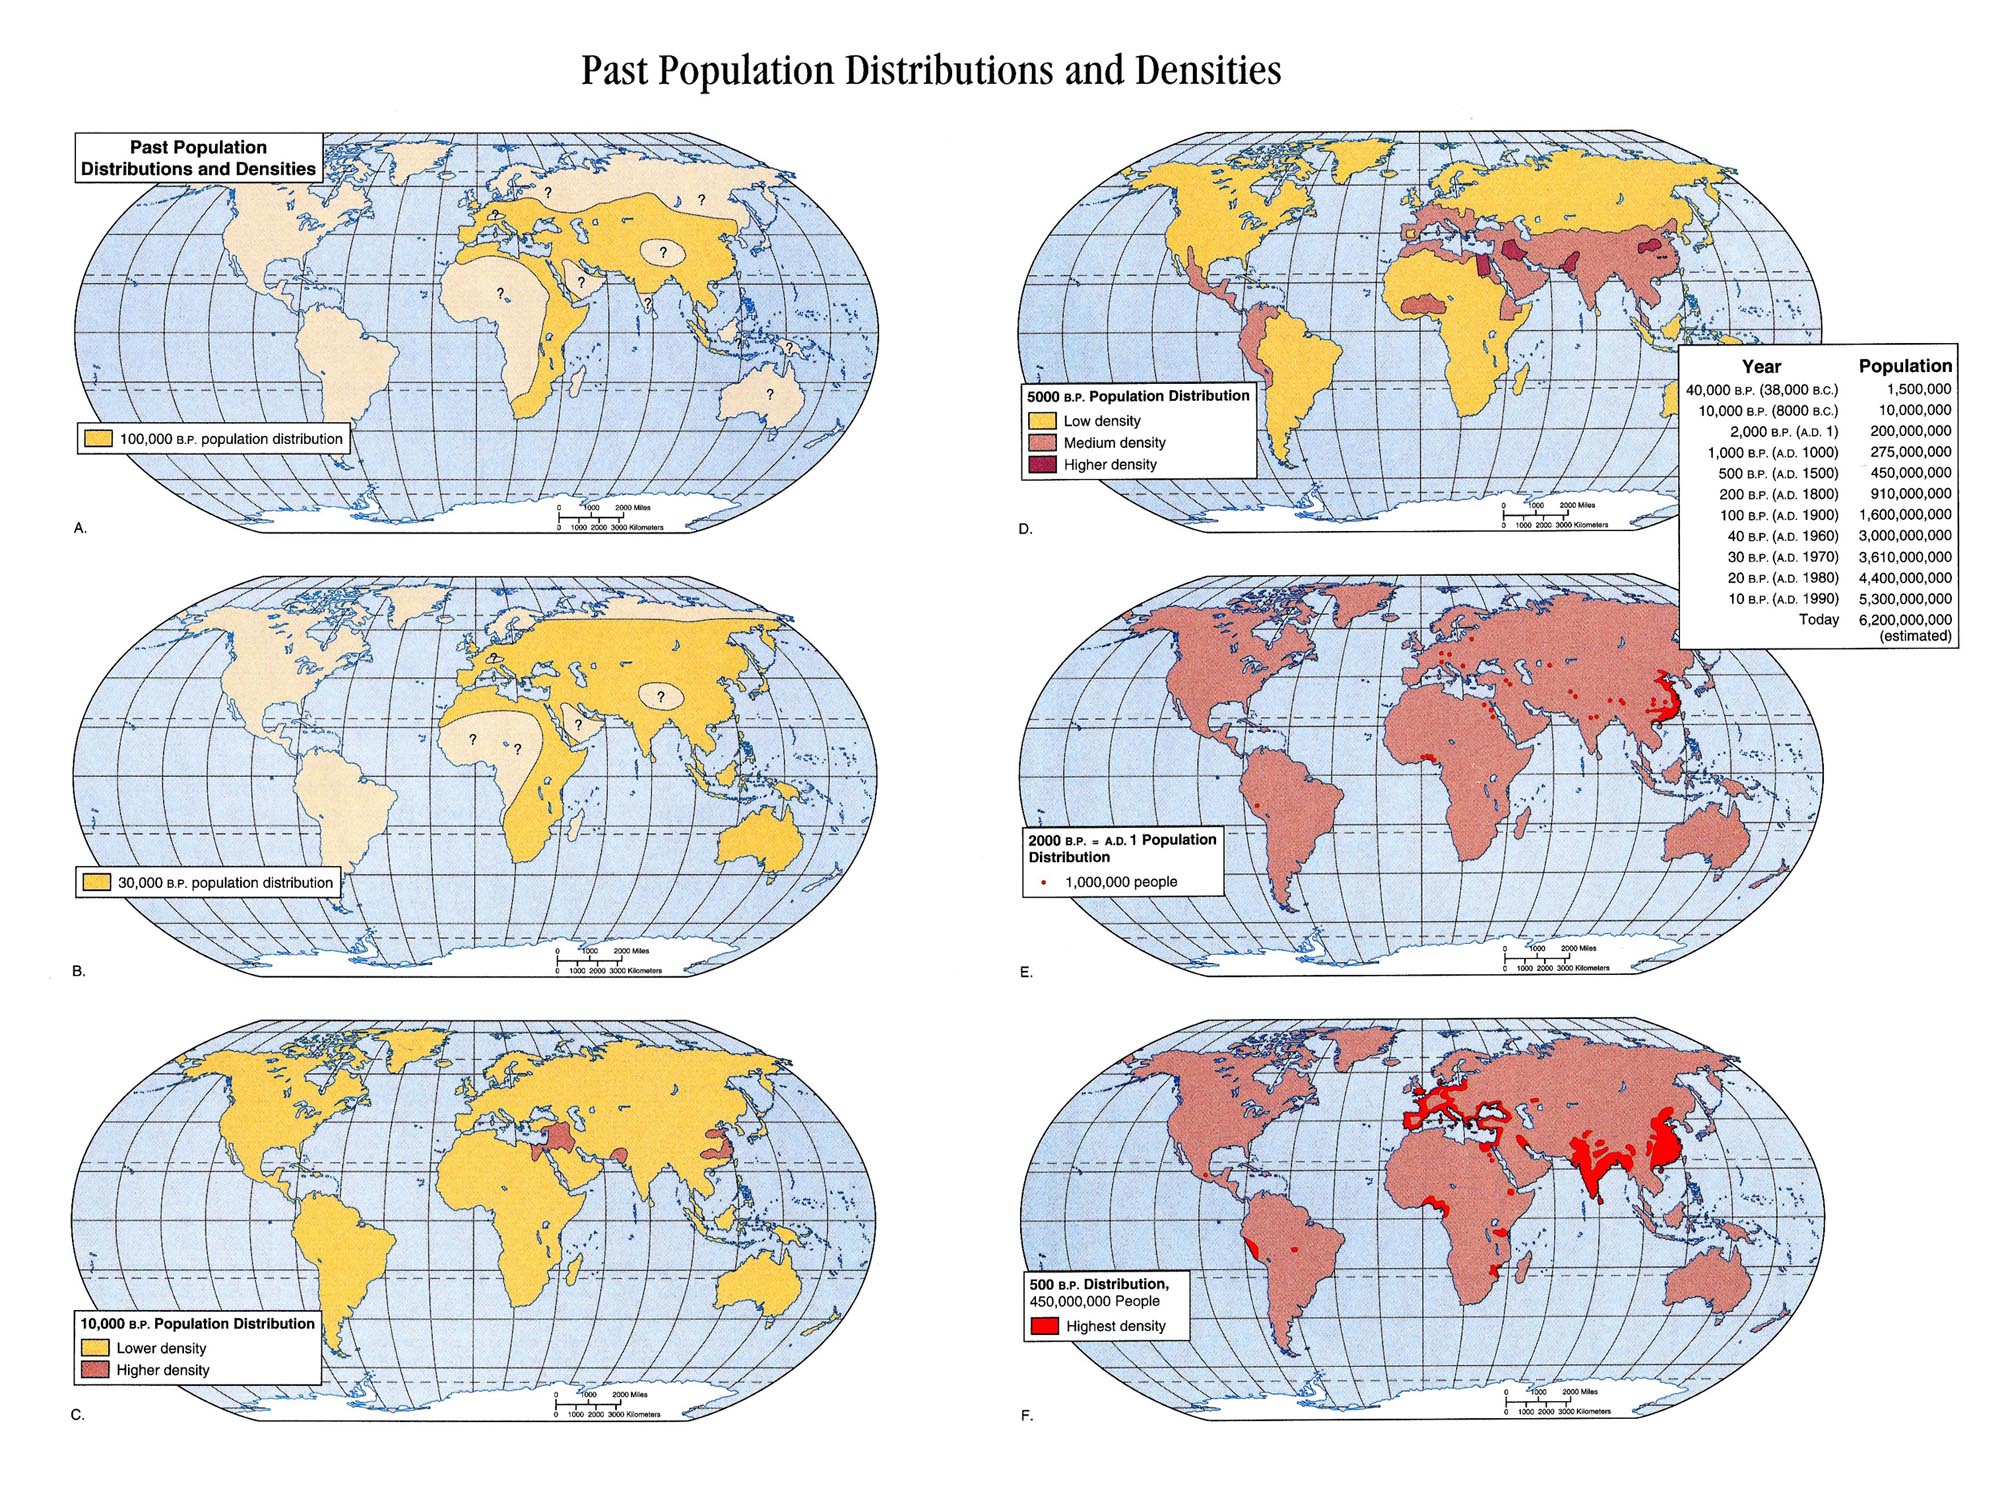 World Population Distributions and Densities, 38,000 BC to Present